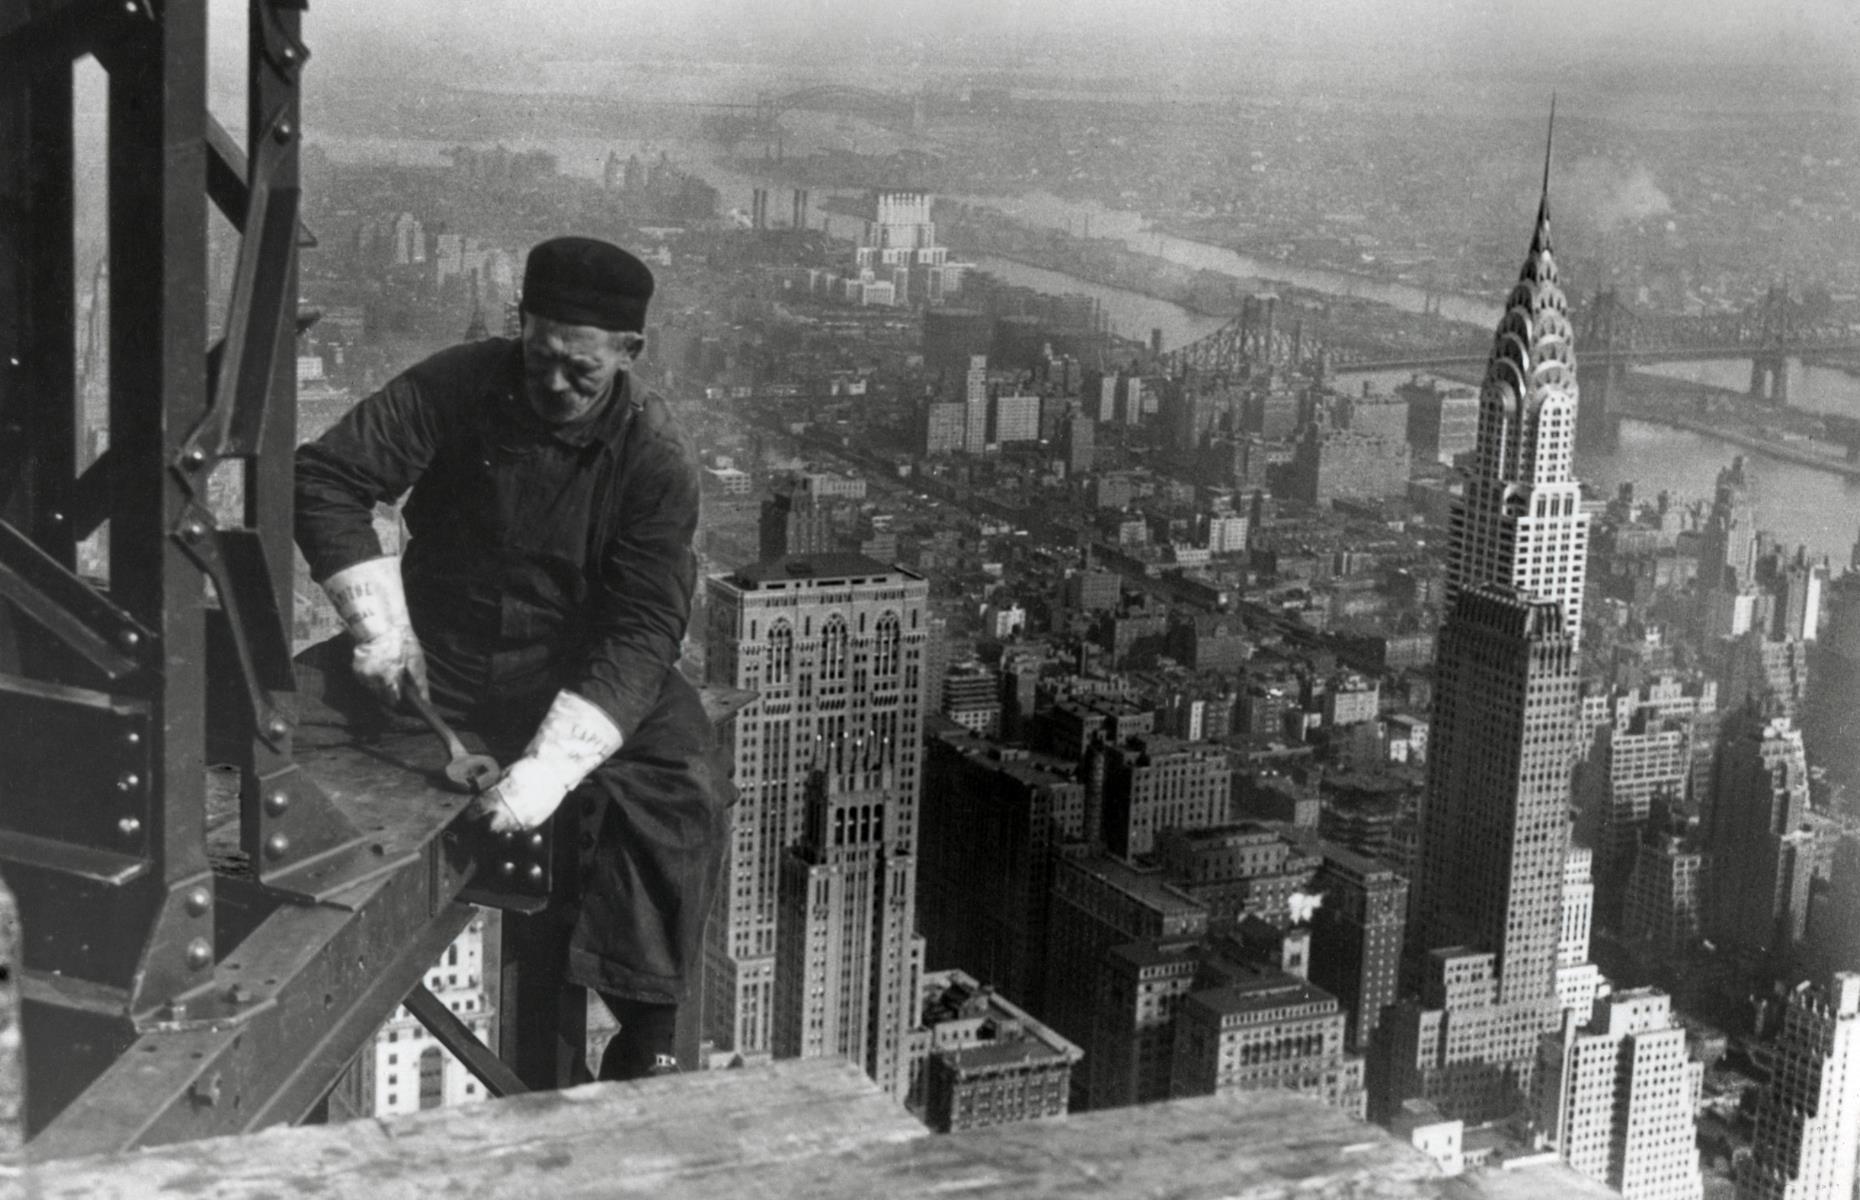 <p>New York’s iconic 103-story Art Deco skyscraper was completed in 1931 and was the world’s tallest building up until the 1970s. Today it is one of the city's most-visited and recognized landmarks, starting its on-screen career in the 1933 movie <em>King Kong</em>. However, despite generating great publicity and fanfare at the time of its construction, the Empire State Building remained relatively empty and unvisited until the 1950s. By 1976, its observatory had welcomed its 50 millionth visitor.</p>